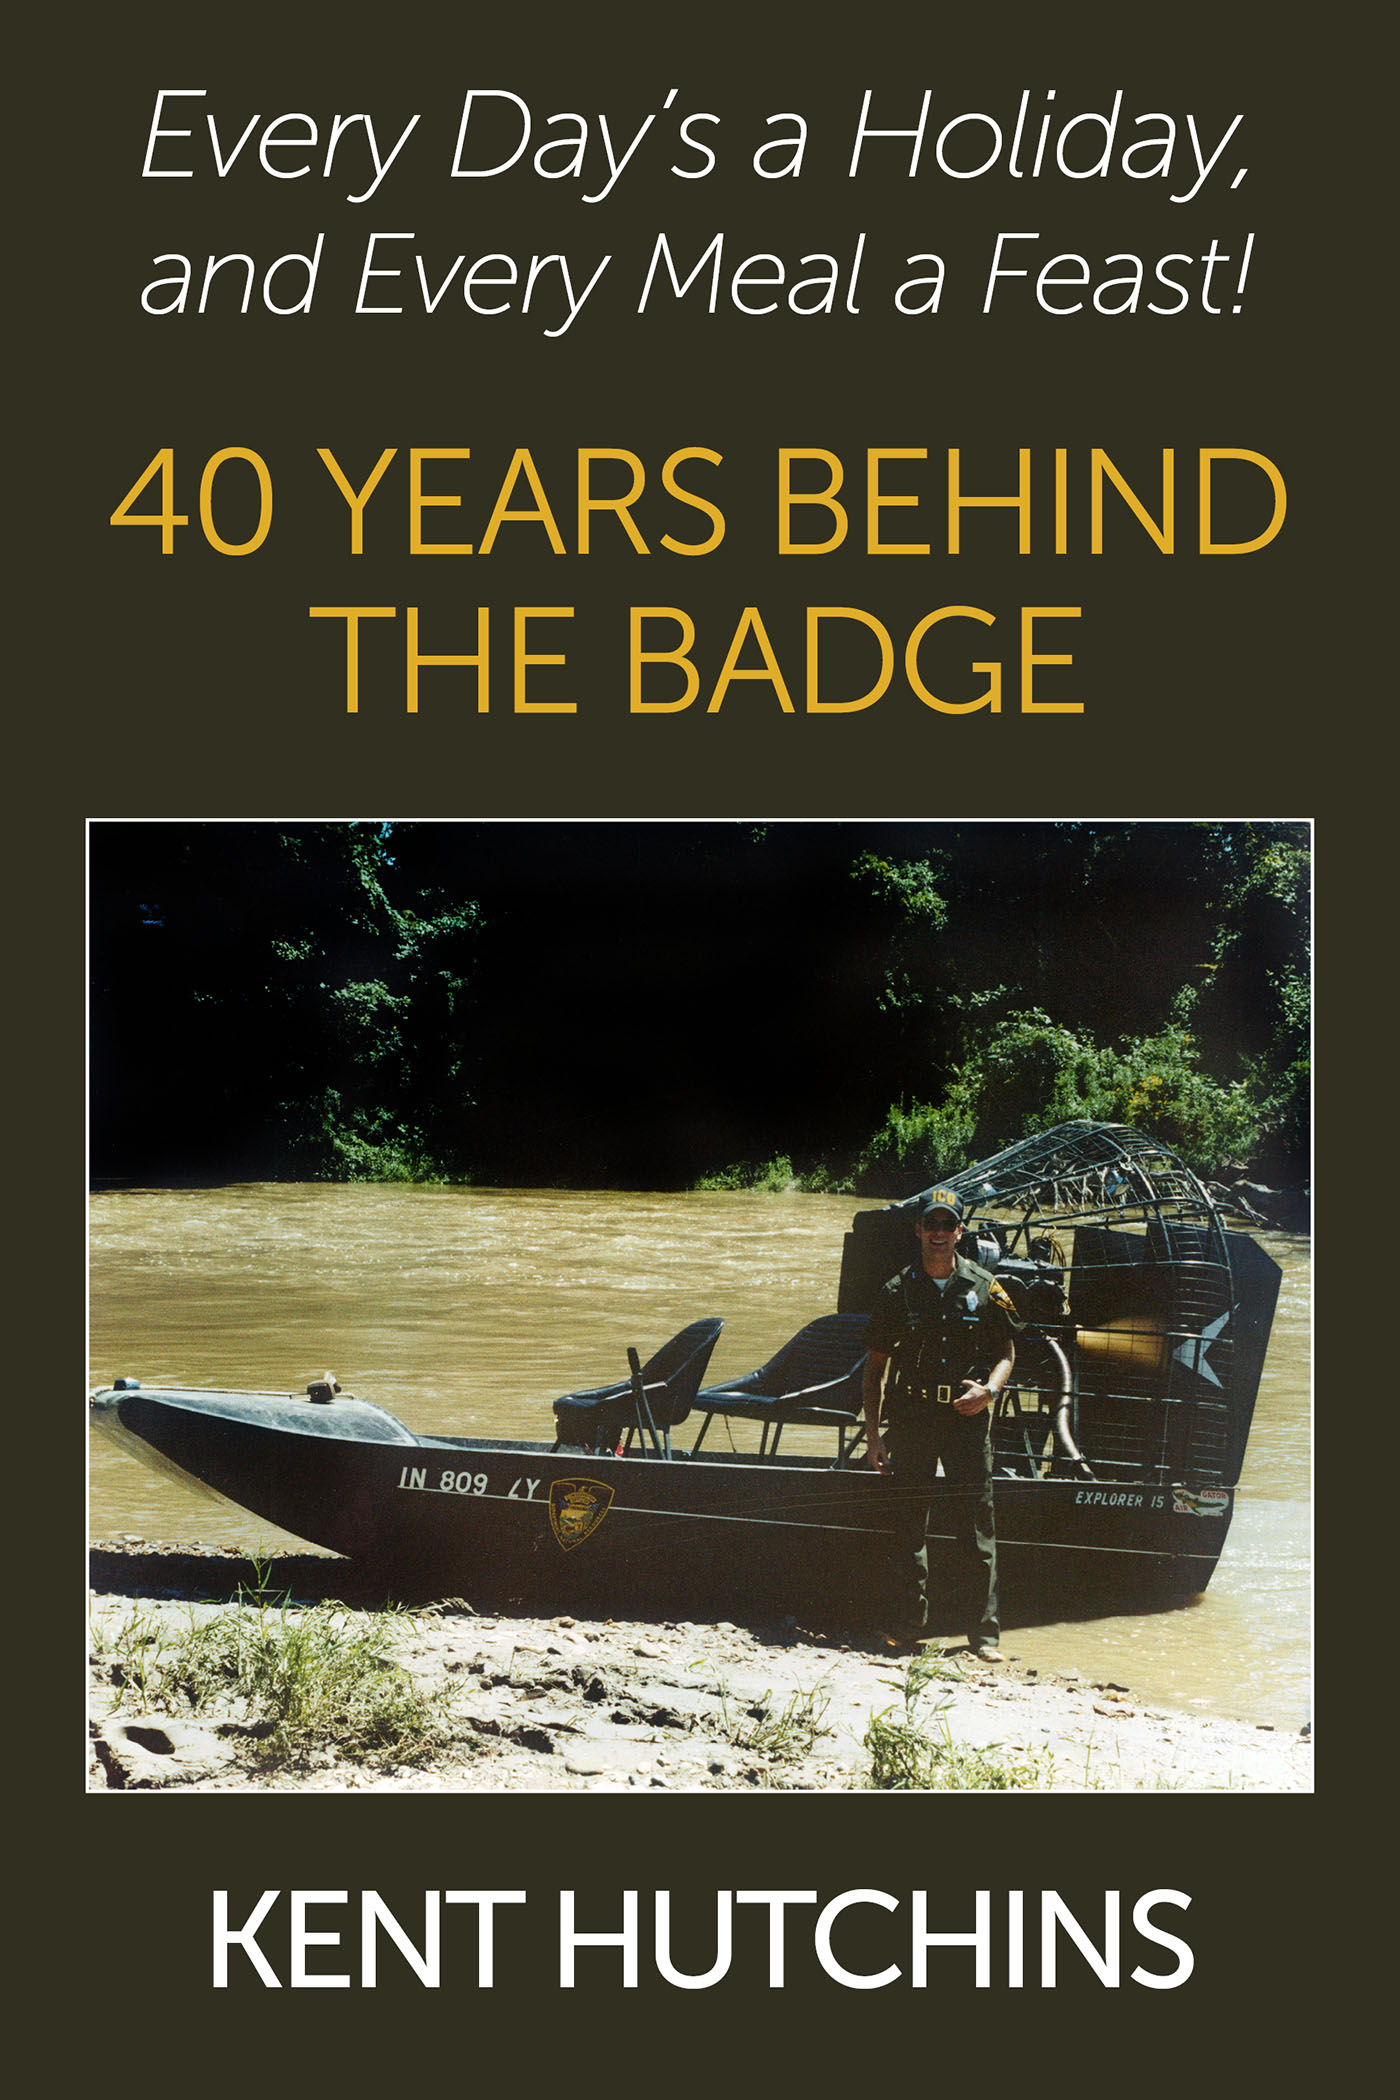 Every Day's a Holiday and Every Meal a Feast! 40 Years Behind the Badge by Kent Hutchins